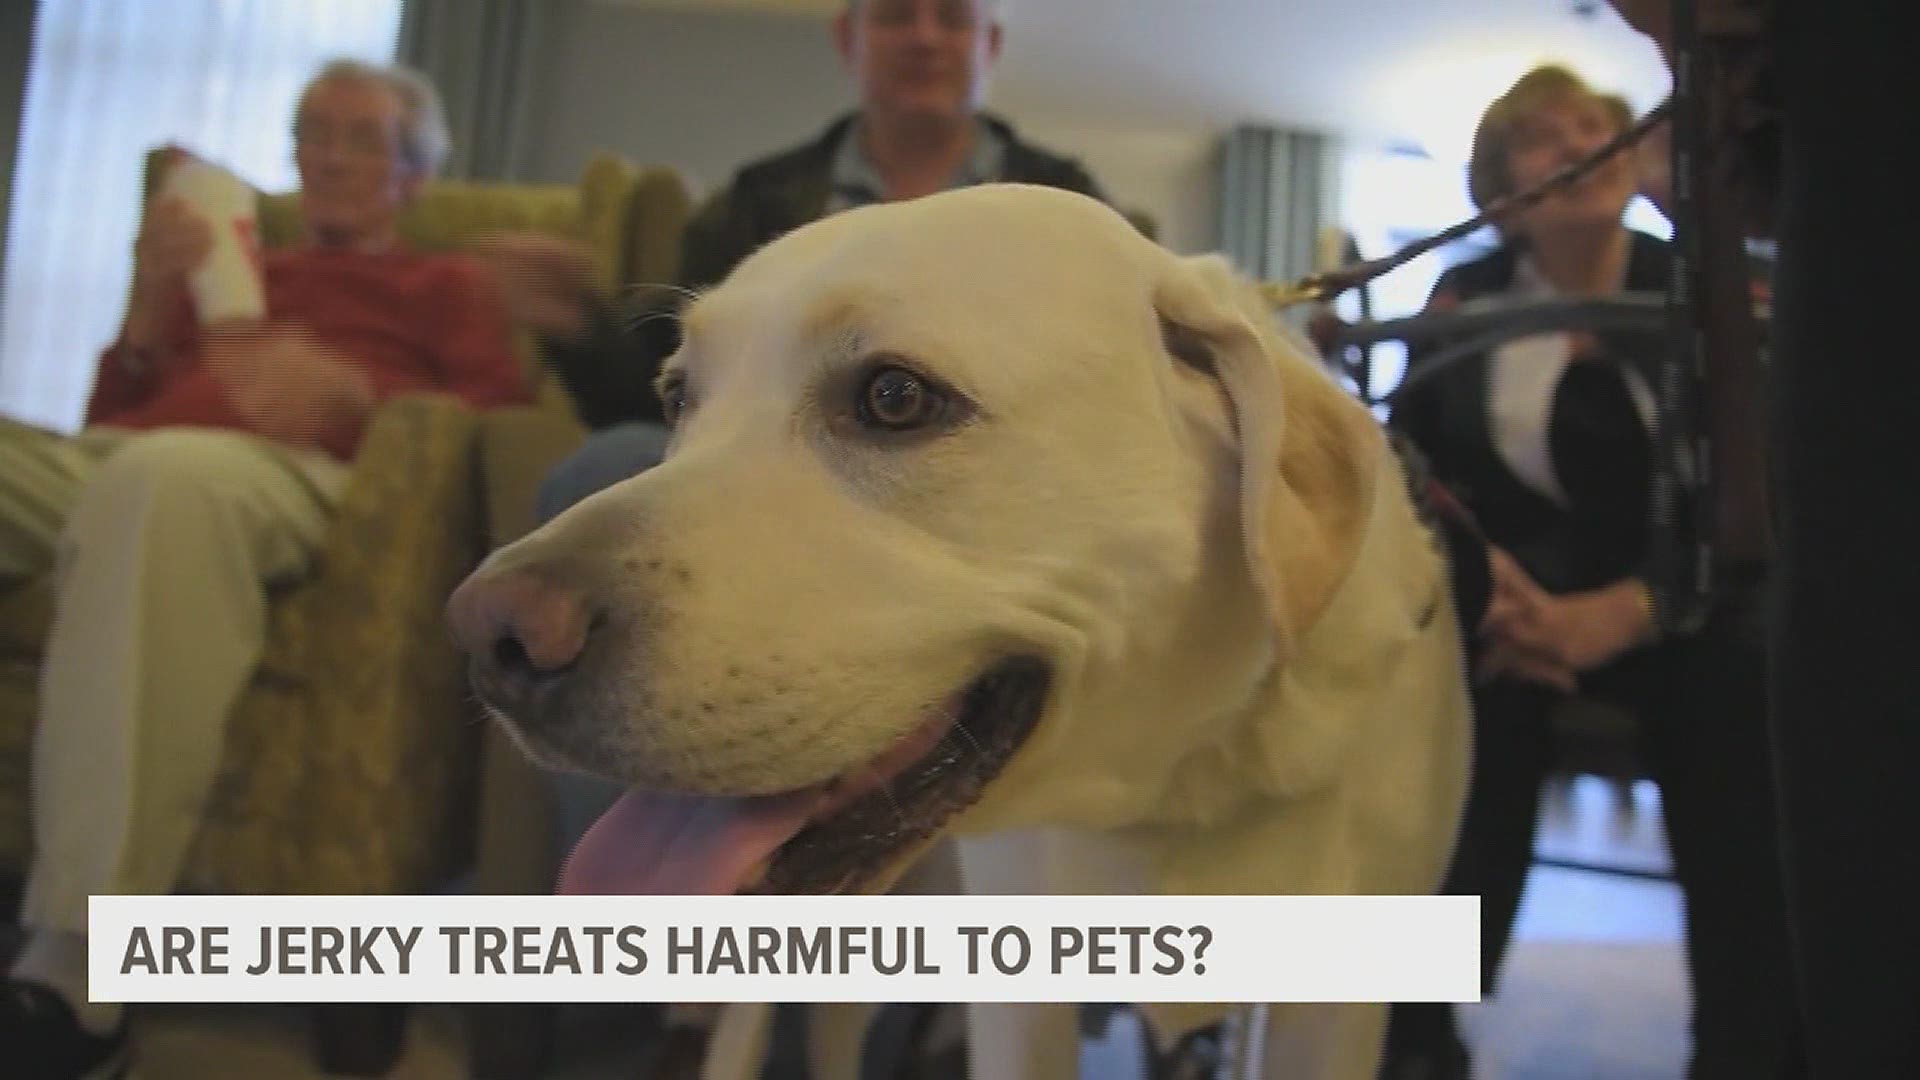 Dr. Bill Lewis of Lincoln Highway Vet Clinic spoke with FOX43's Chelsea Koerbler about being cautious about the types of treats you buy for your pets.